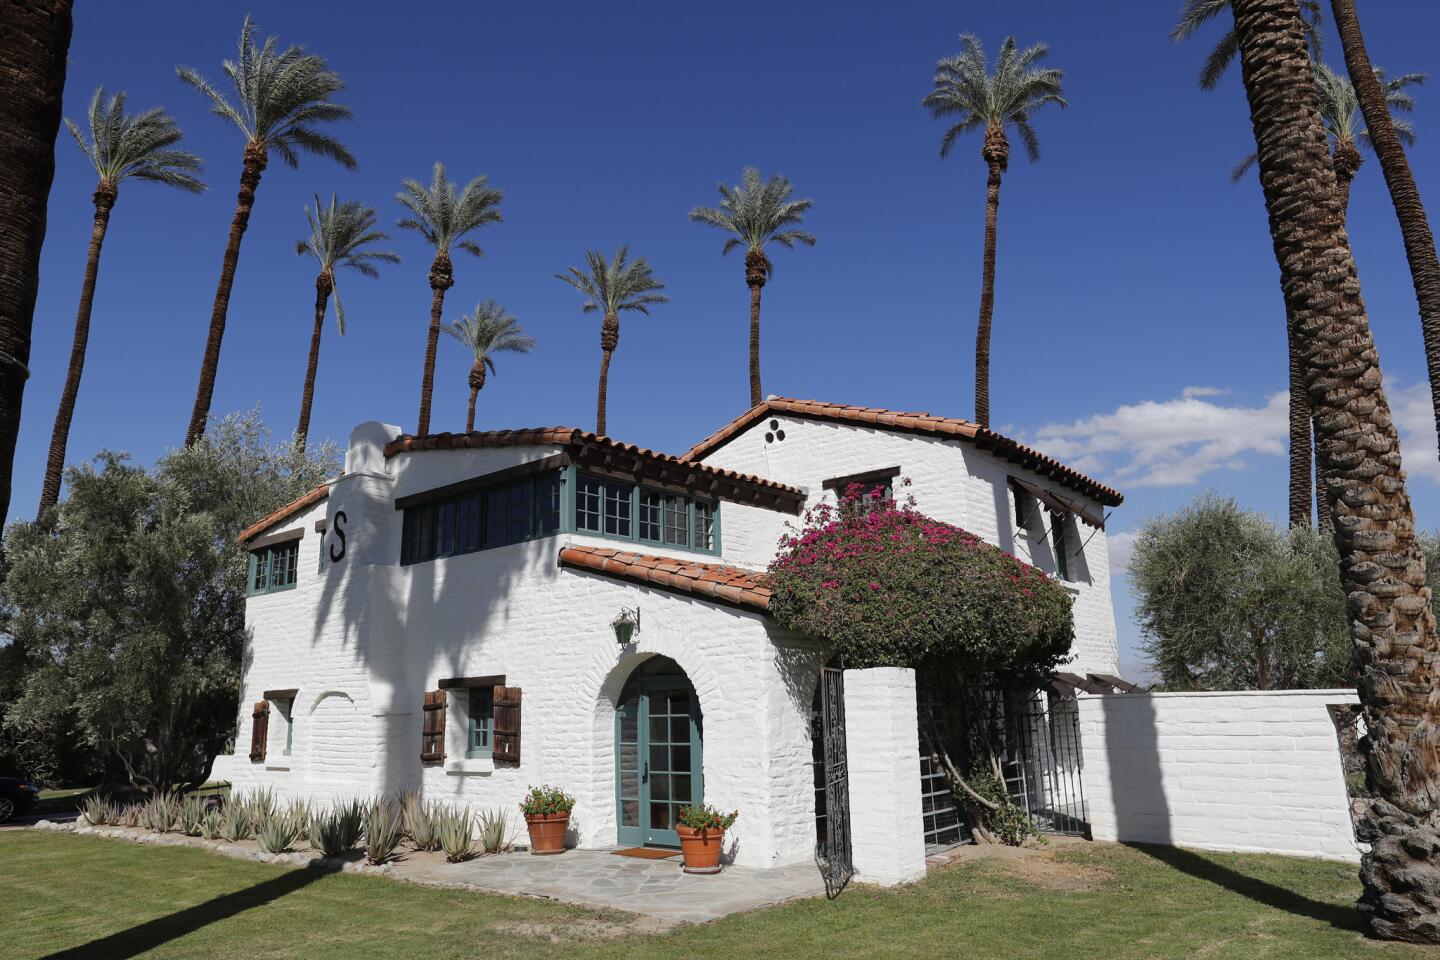 The historic 1922 Cavanagh Adobe in Indian Wells is one of the oldest adobe homes in the Coachella Valley. Situated on an acre of land and populated with huge date palms, the home will be open to the public during the Modernism Week Fall Preview on Oct. 19-22.